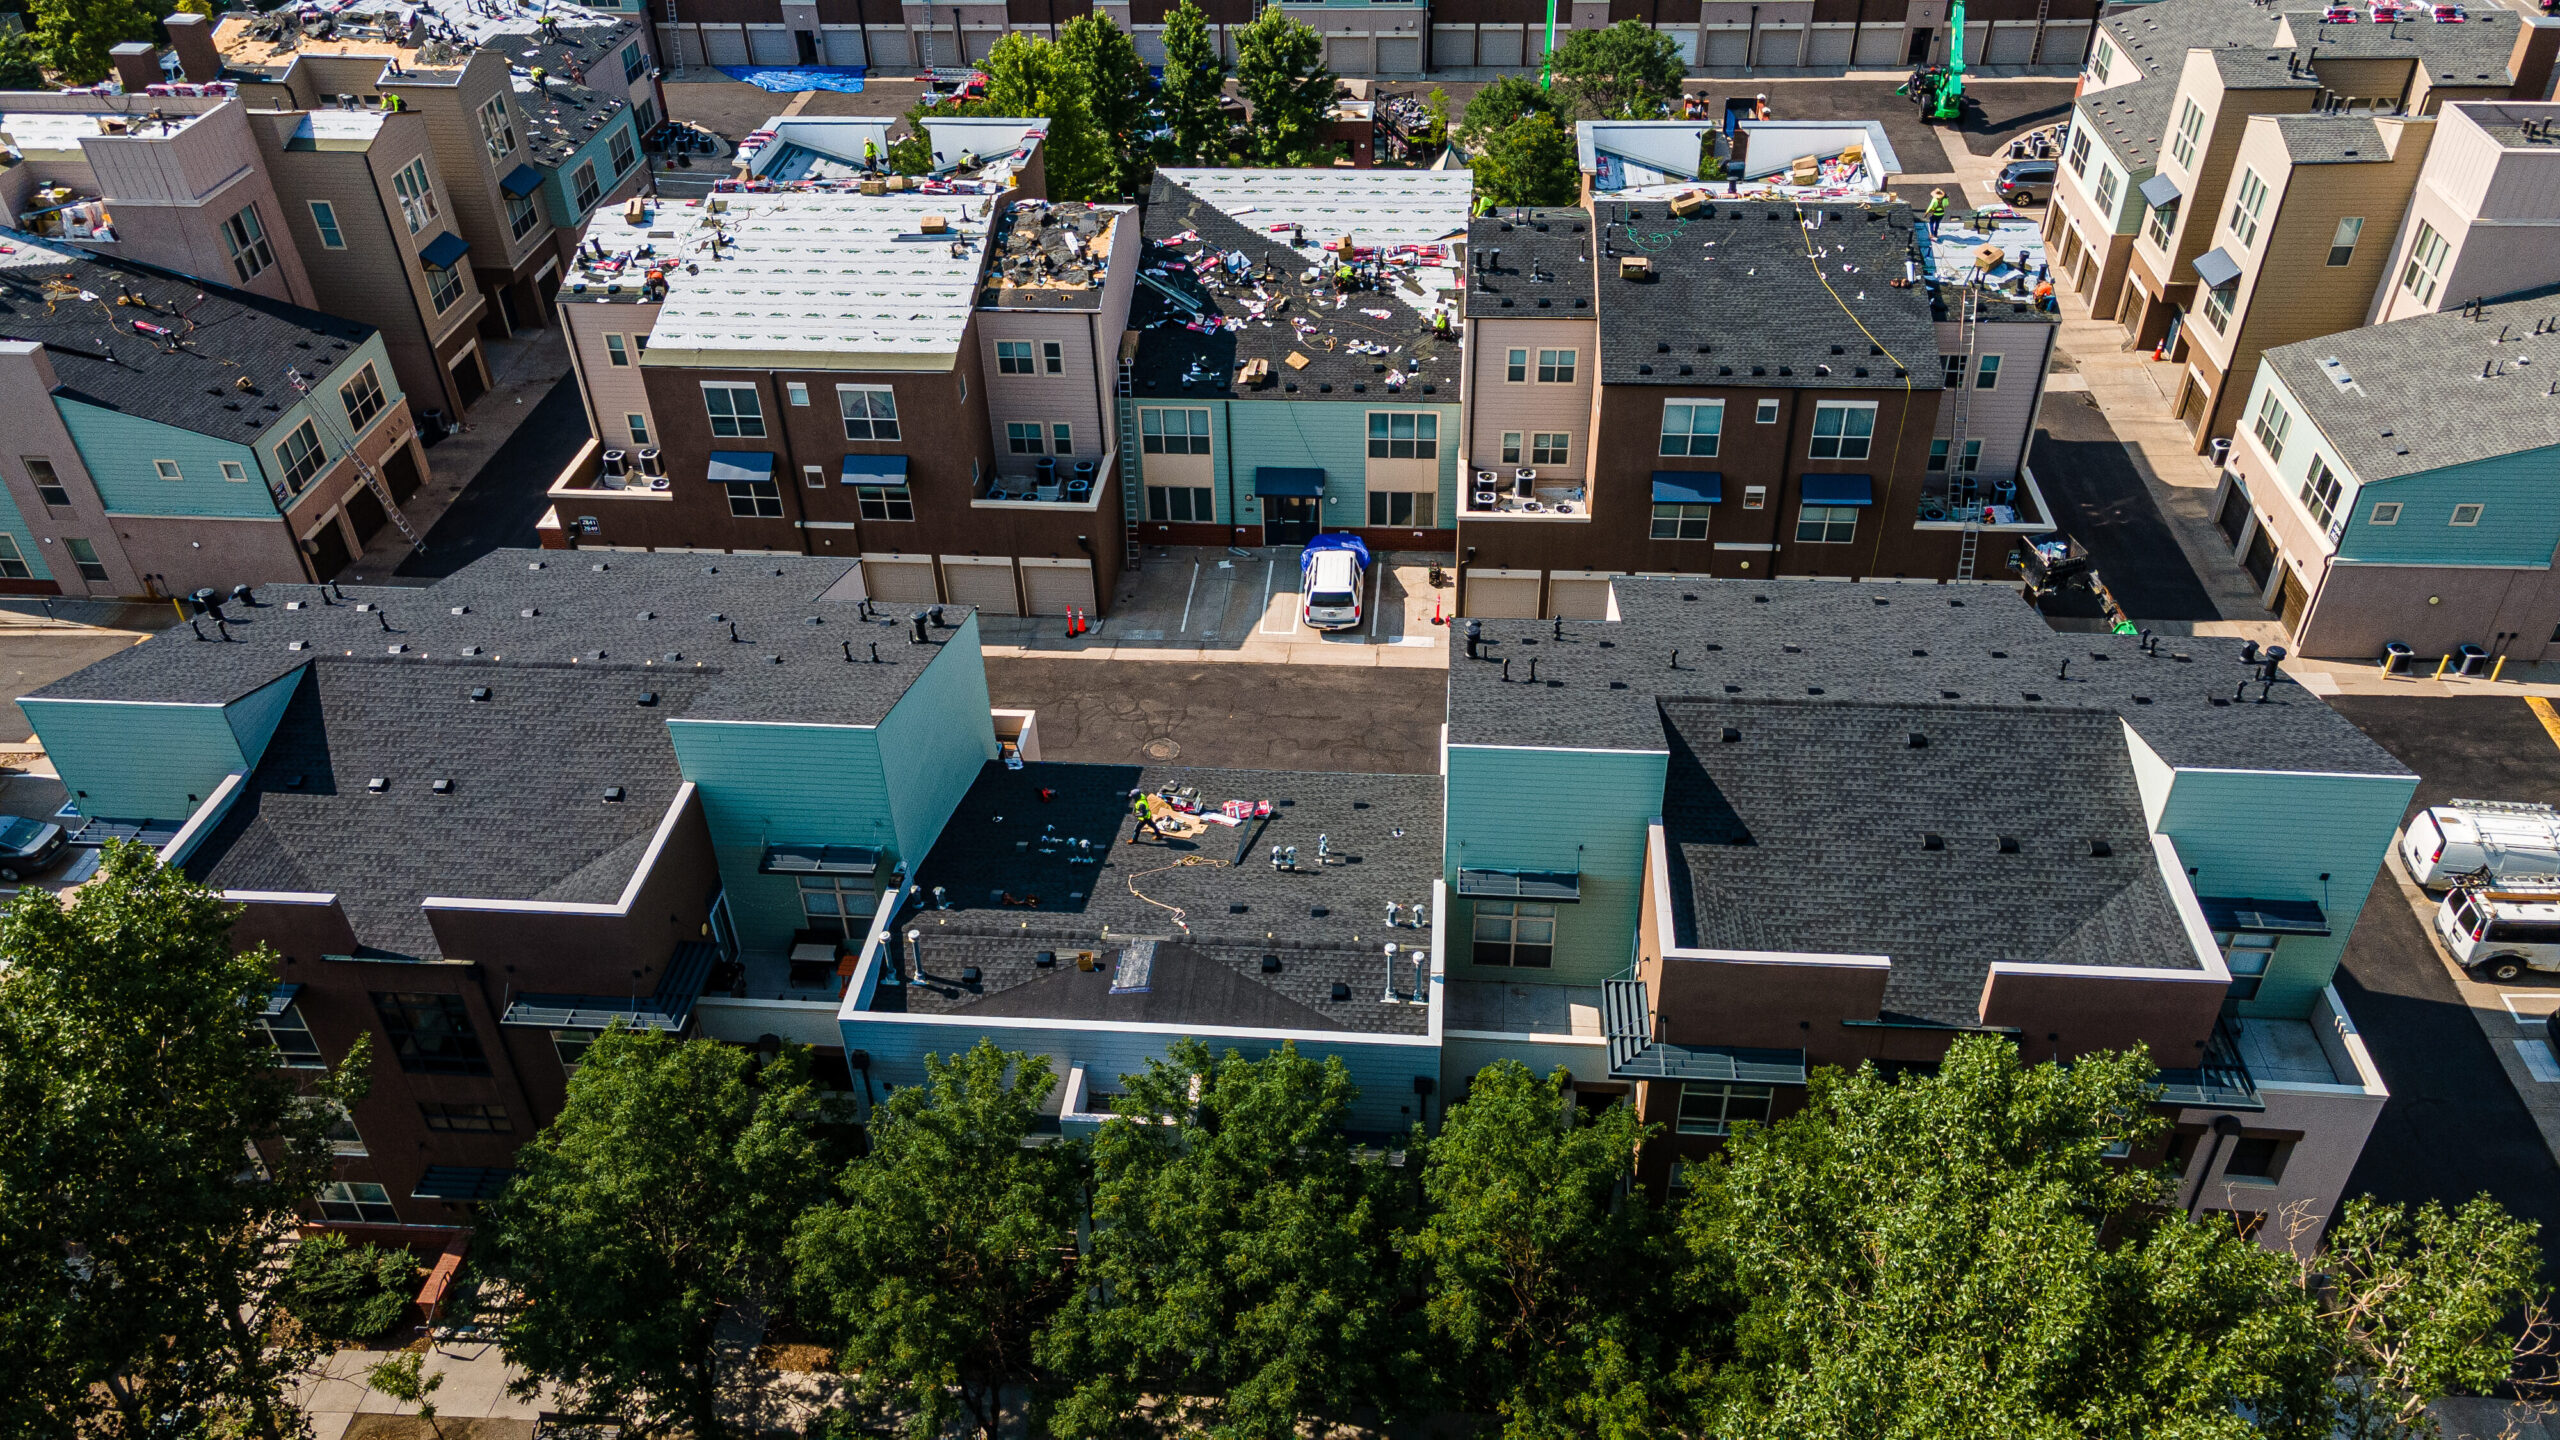 Overhead shot of apartment buildings undergoing roofing repairs